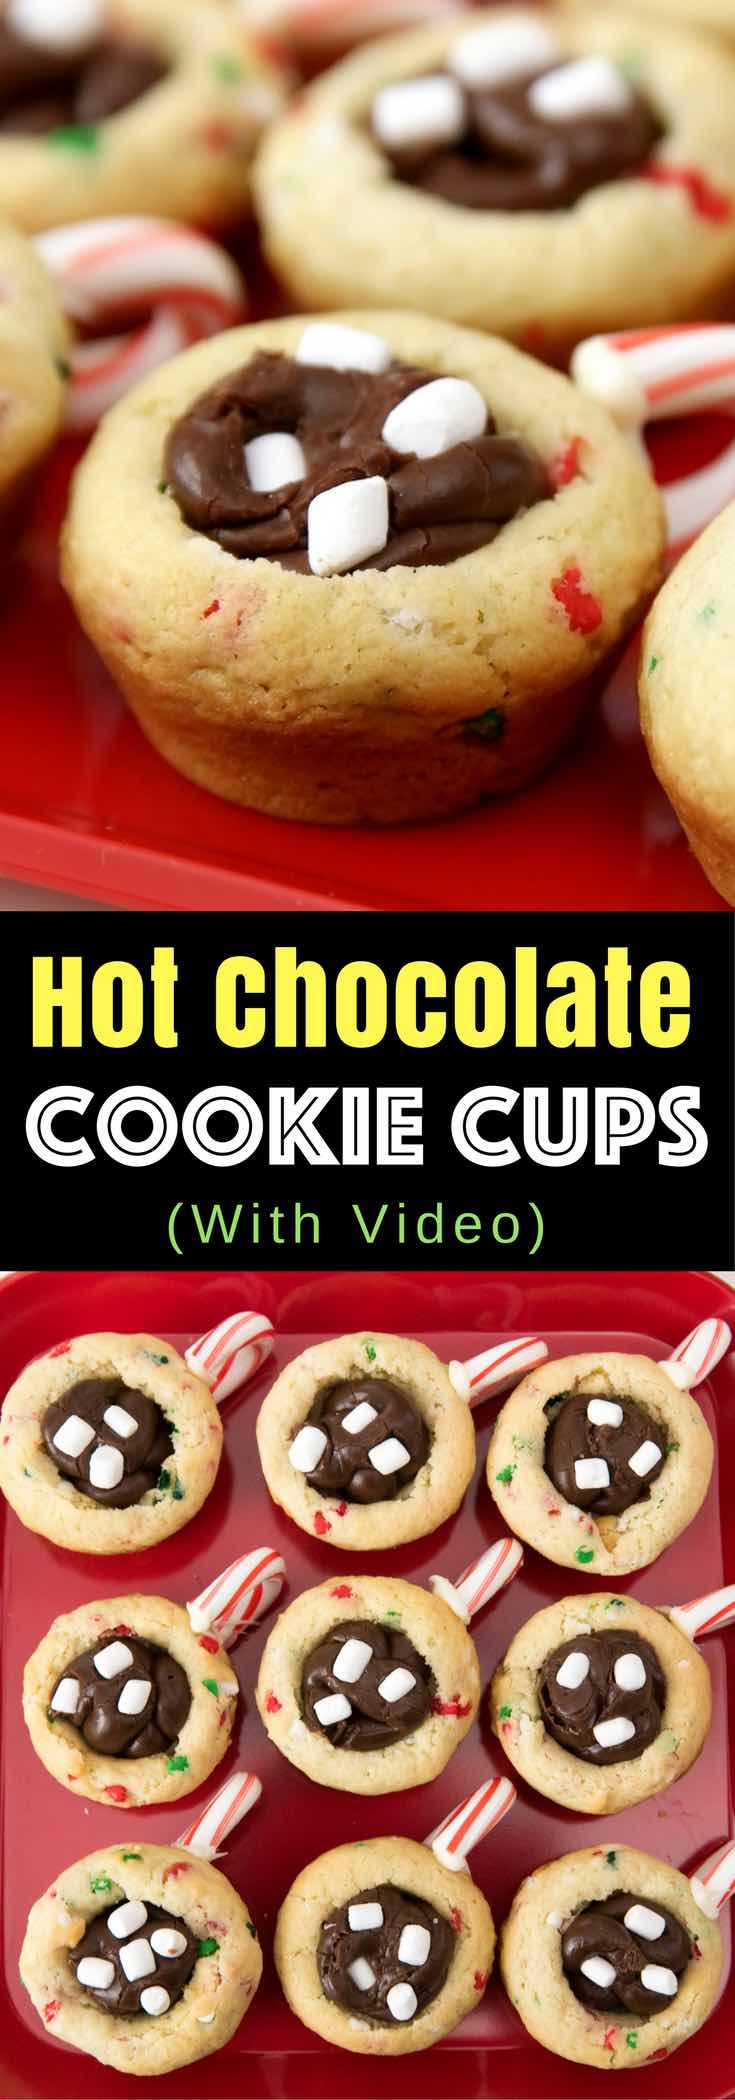 Hot Chocolate Cookie Cups – Quick and easy dessert recipe that’s so festive and great for Christmas! All you need is a few simple ingredients: refrigerated sugar cookie dough, holiday sprinkles, white chocolate, candy cane, chocolate chips, condensed milk and mini marshmallows. So cute! Christmas recipe, party food. Video recipe.